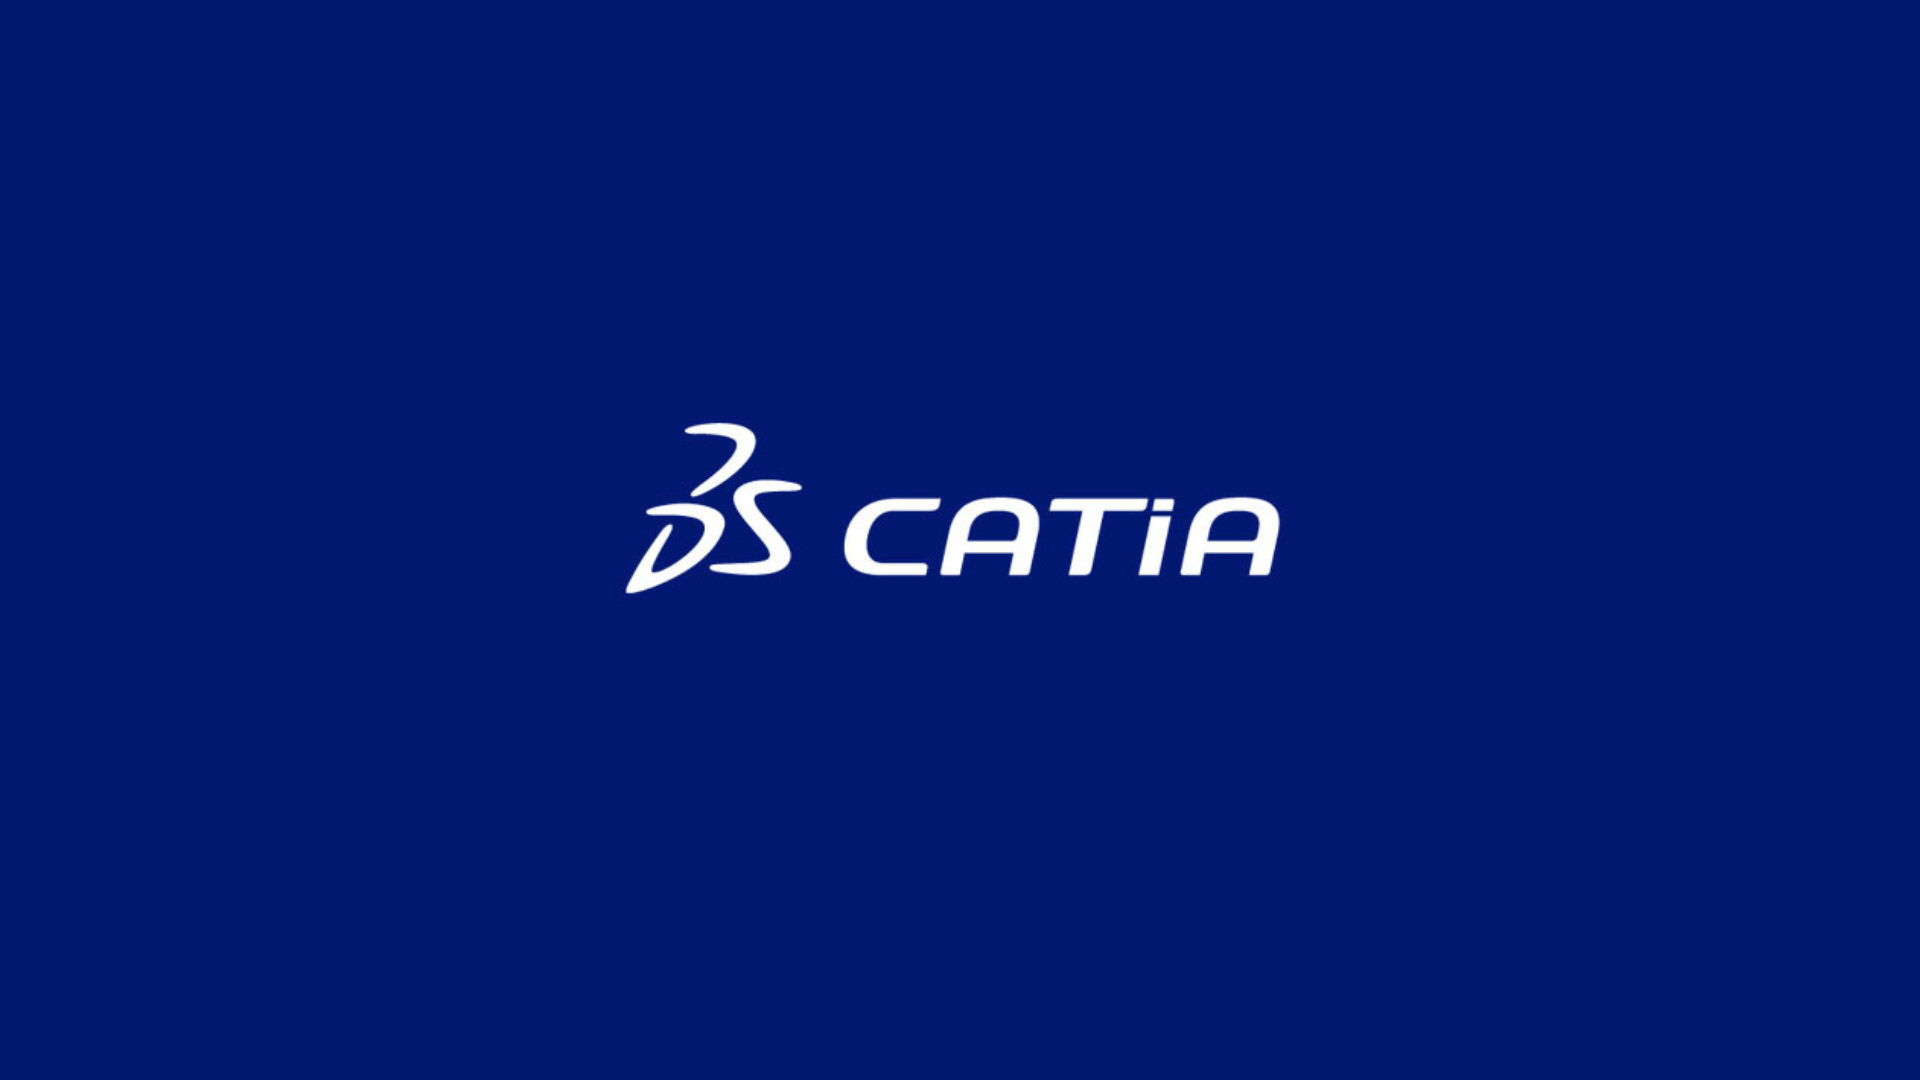 Create electrical wire route projects on catia v5 r26 by Intwelvemx | Fiverr